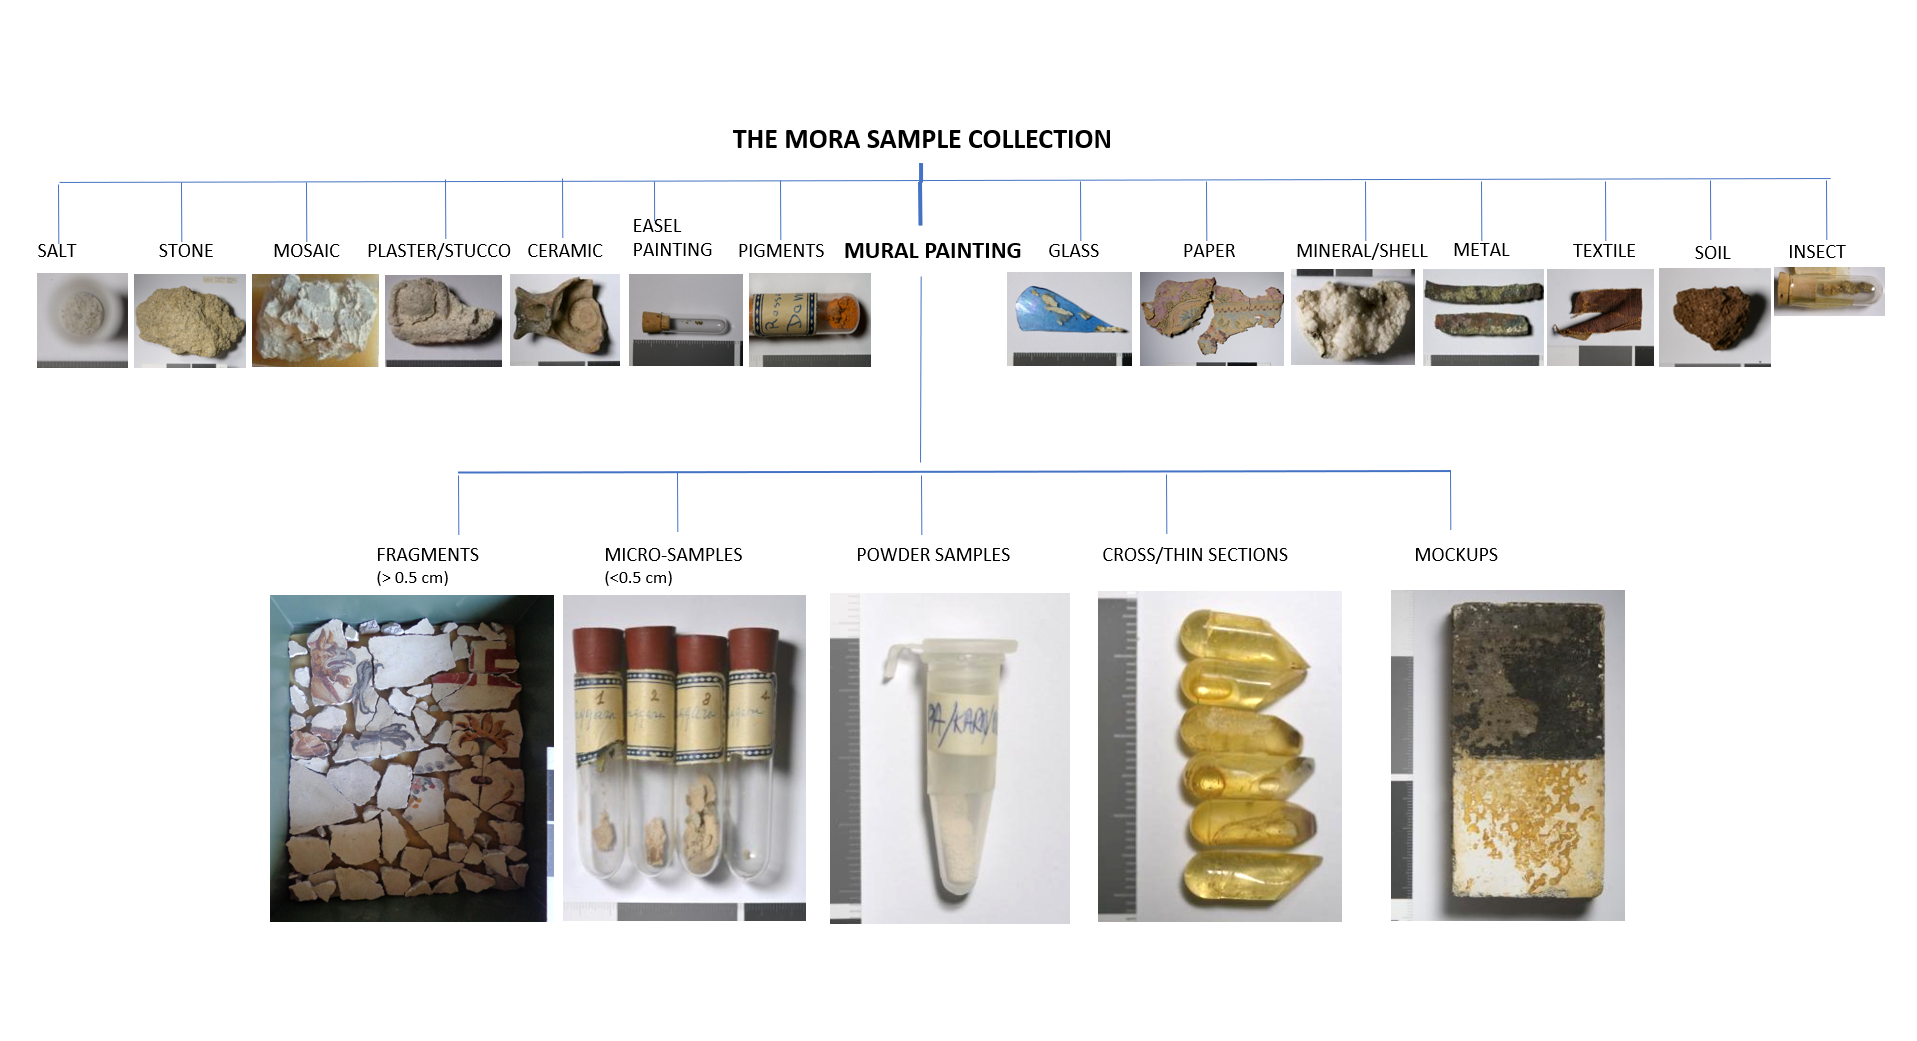 Fig. 3. Types of material samples in the Mora sample collection. Photo by Milene Gil, 2019. © ICCROM